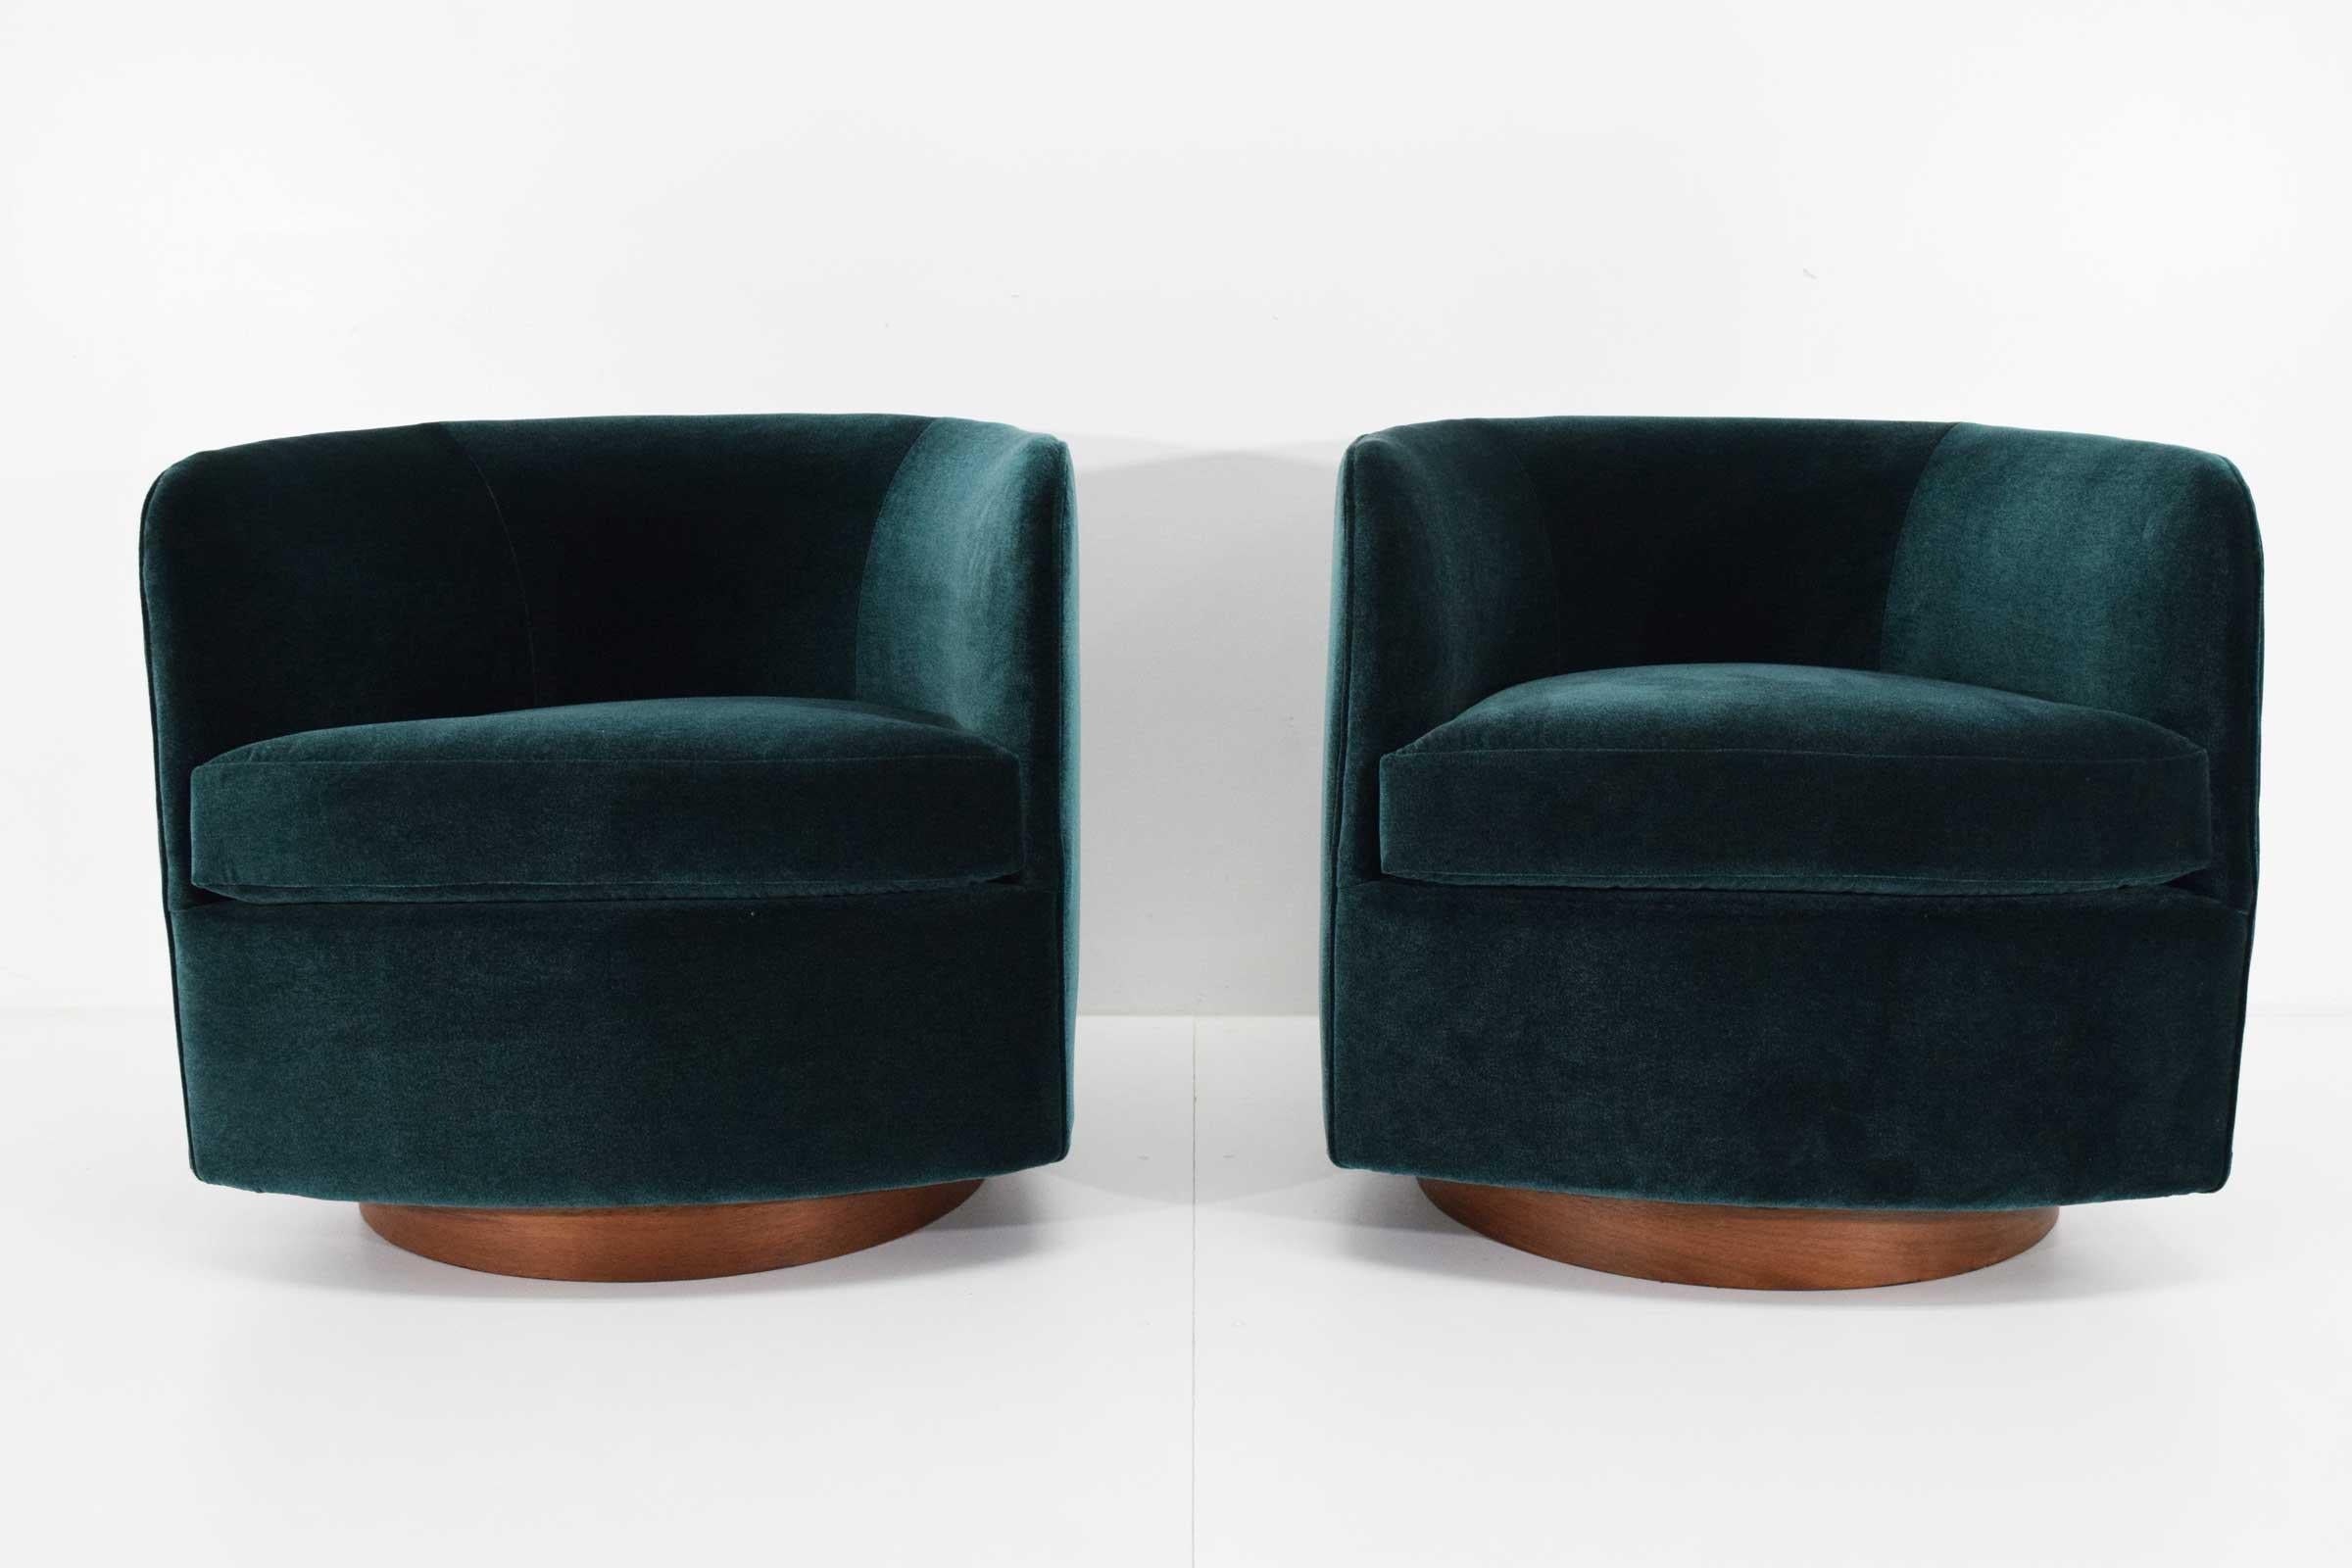 We love these chairs because of their style, comfort and the swivel. A Classic with walnut plinth base by Milo Baughman for Thayer Coggin. We have reupholstered in a rich Holly Hunt fabric.